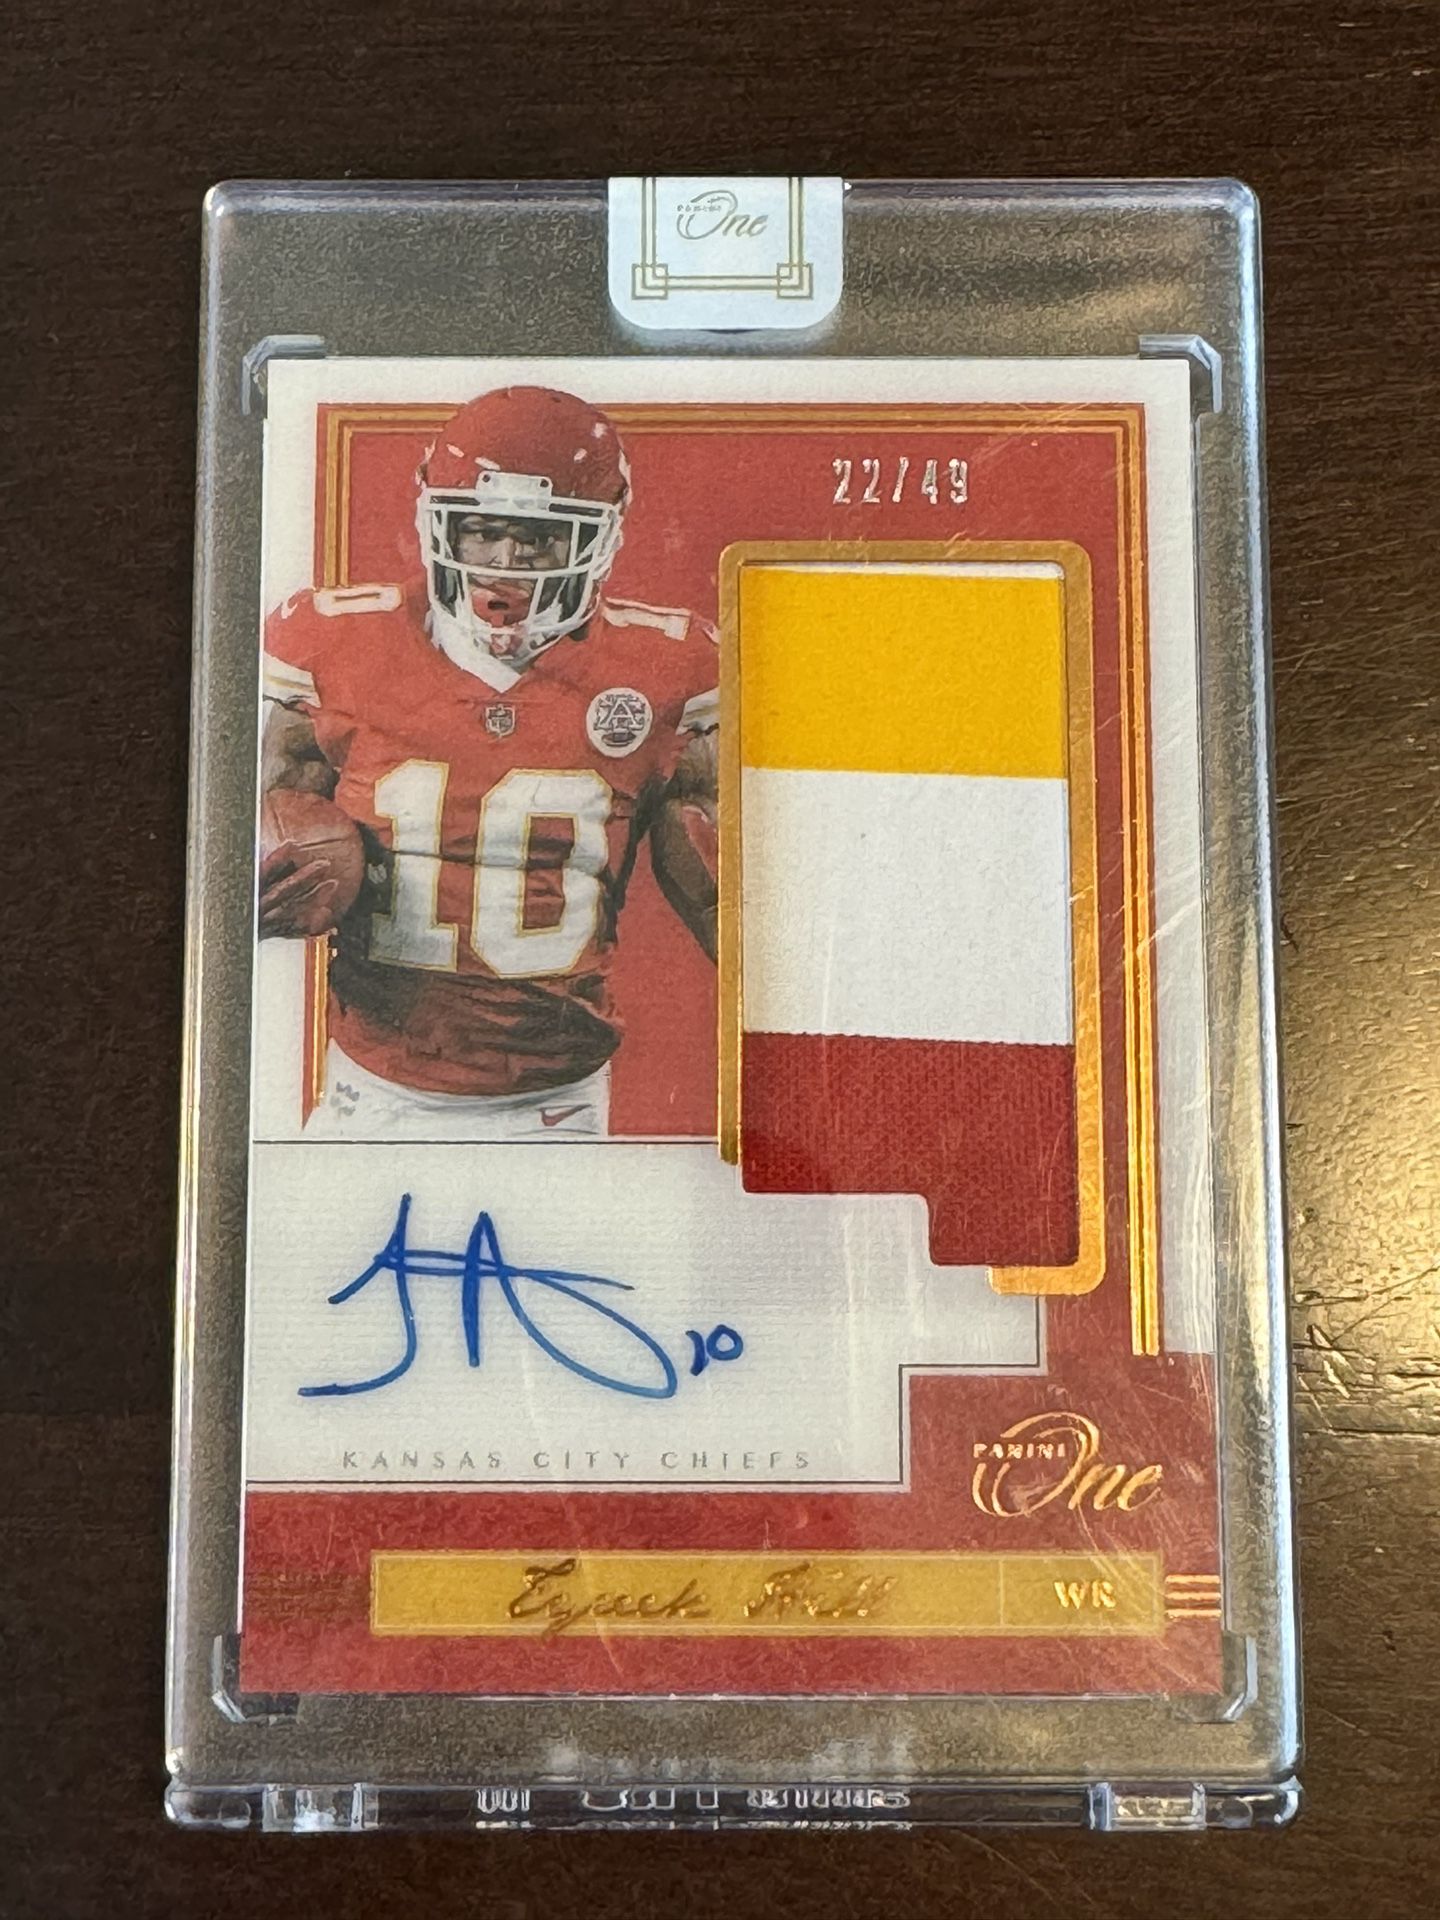 2018 Panini One Tyreek Hill RPA /49 Rookie Auto #138  Kansas City Chiefs, Miami Dolphins  Nasty 3 Color Patch!